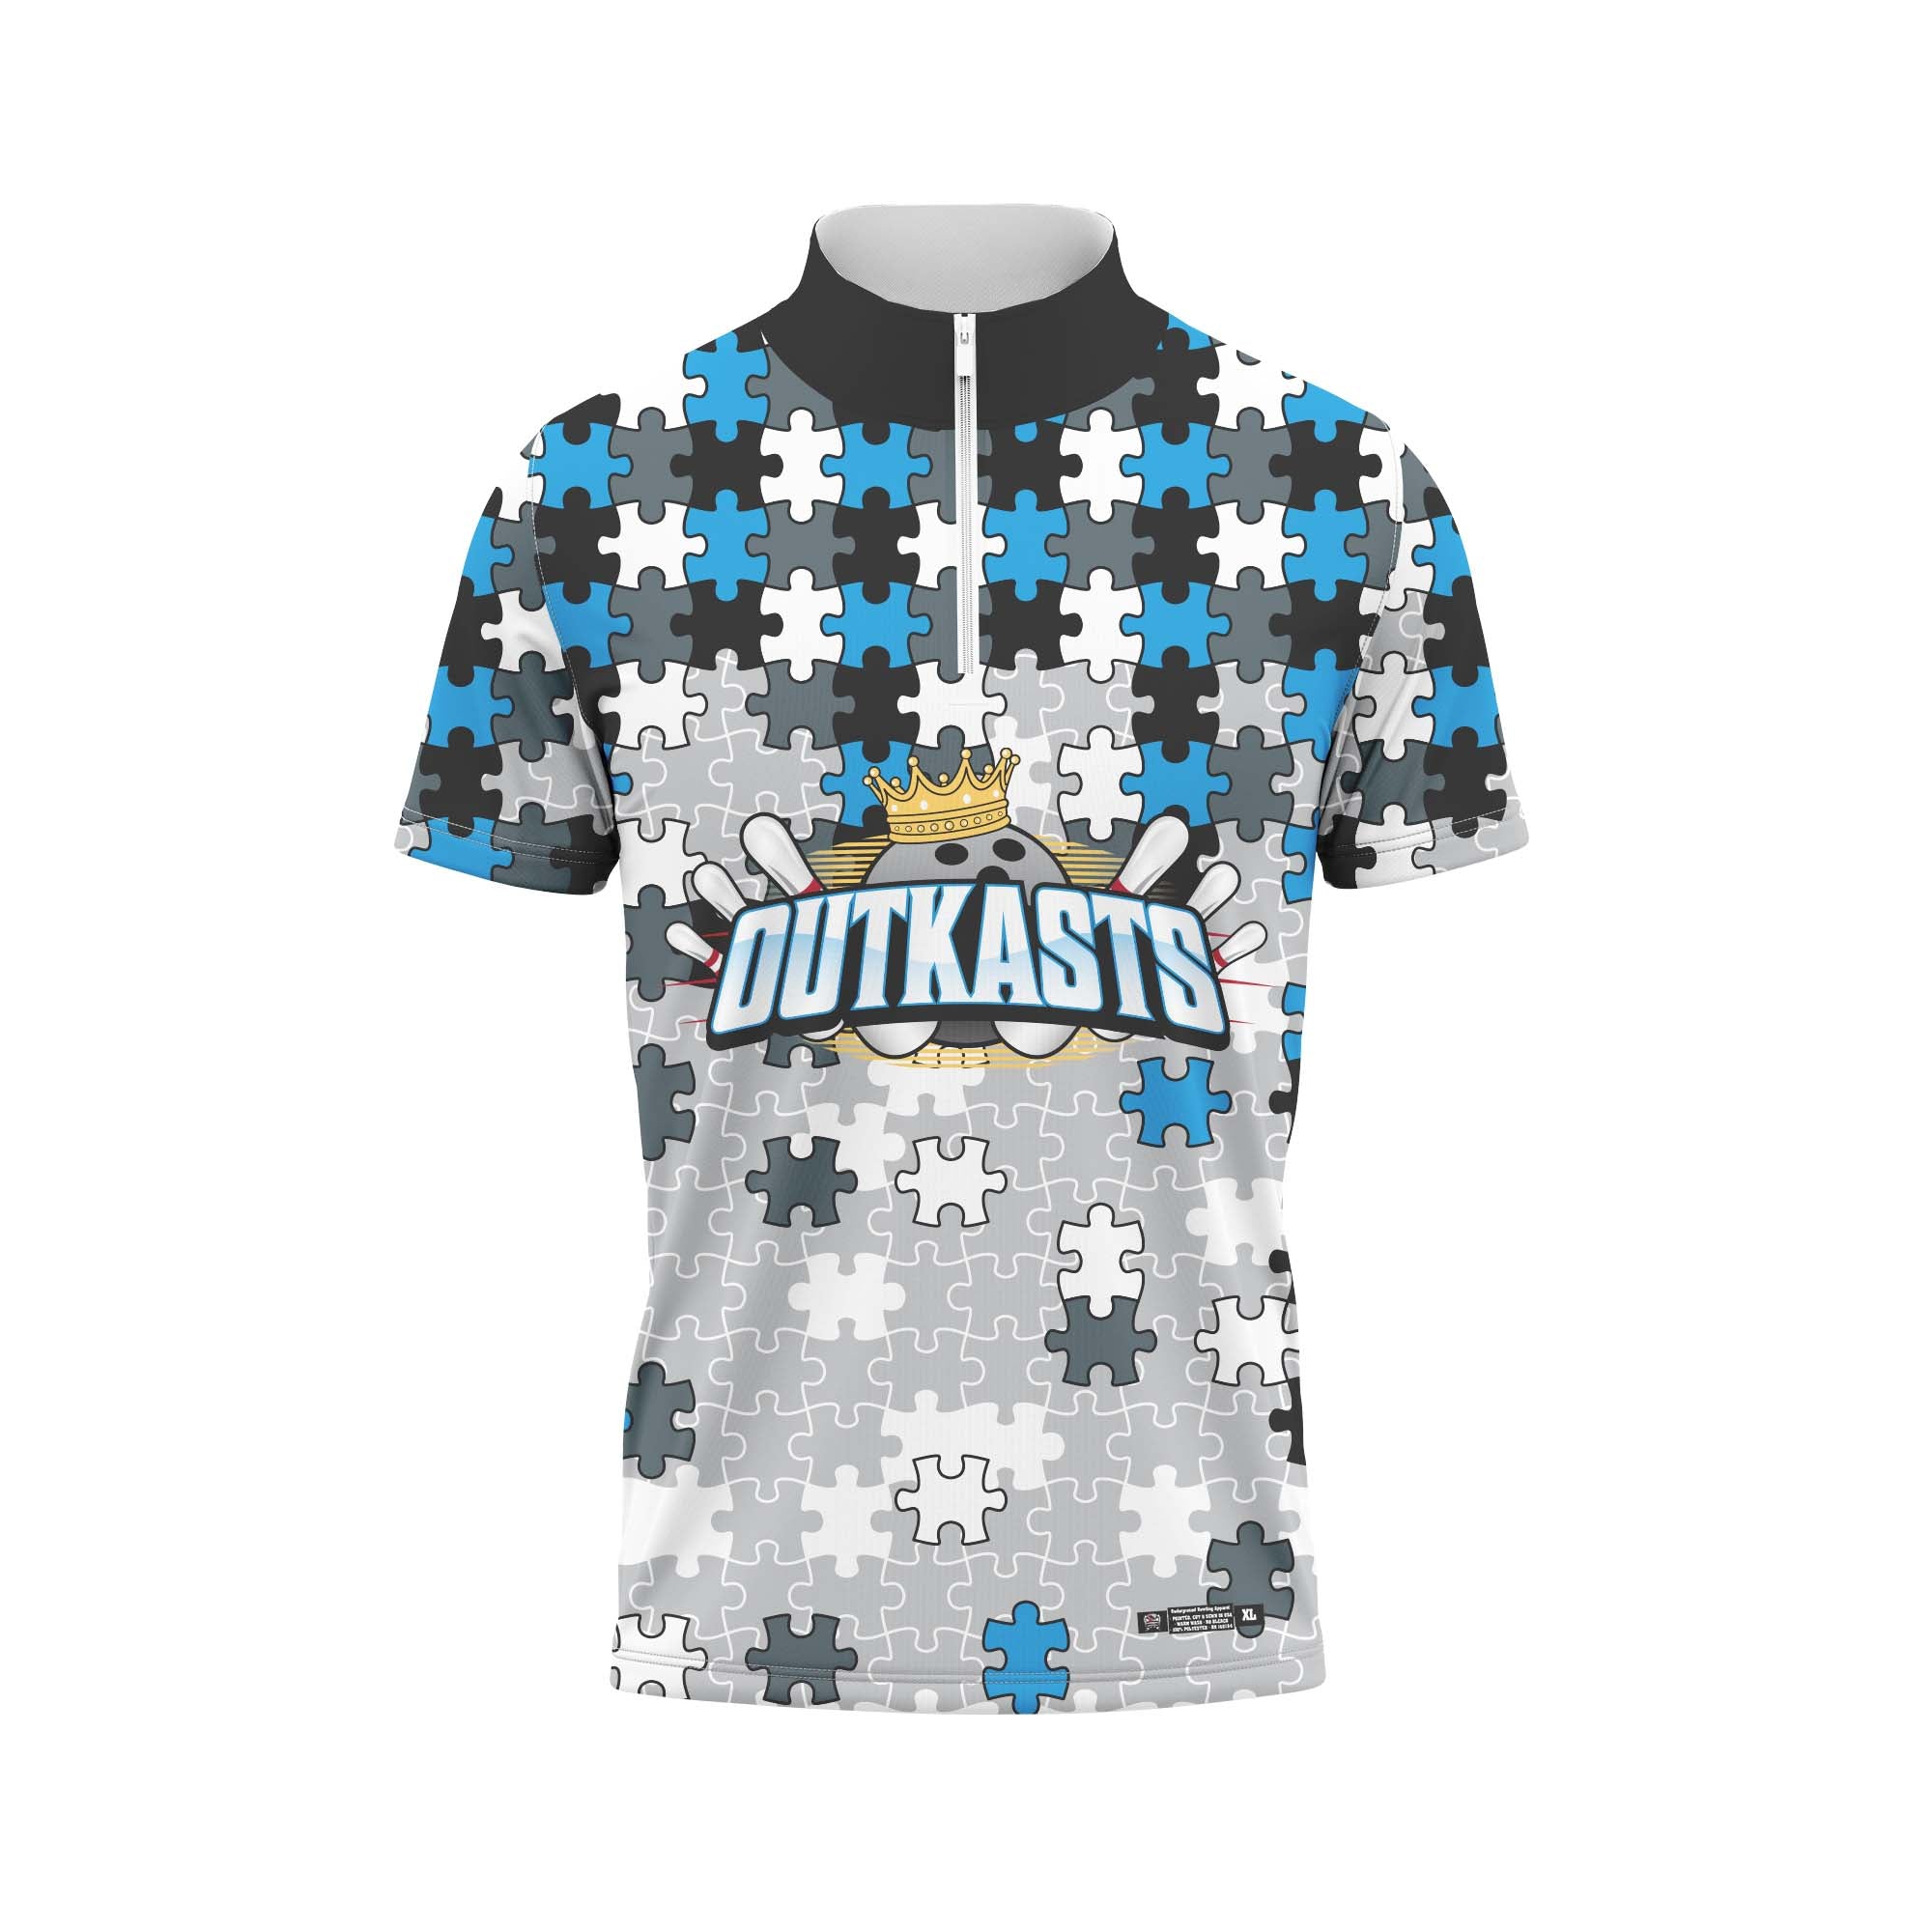 Outkasts Puzzle Jersey